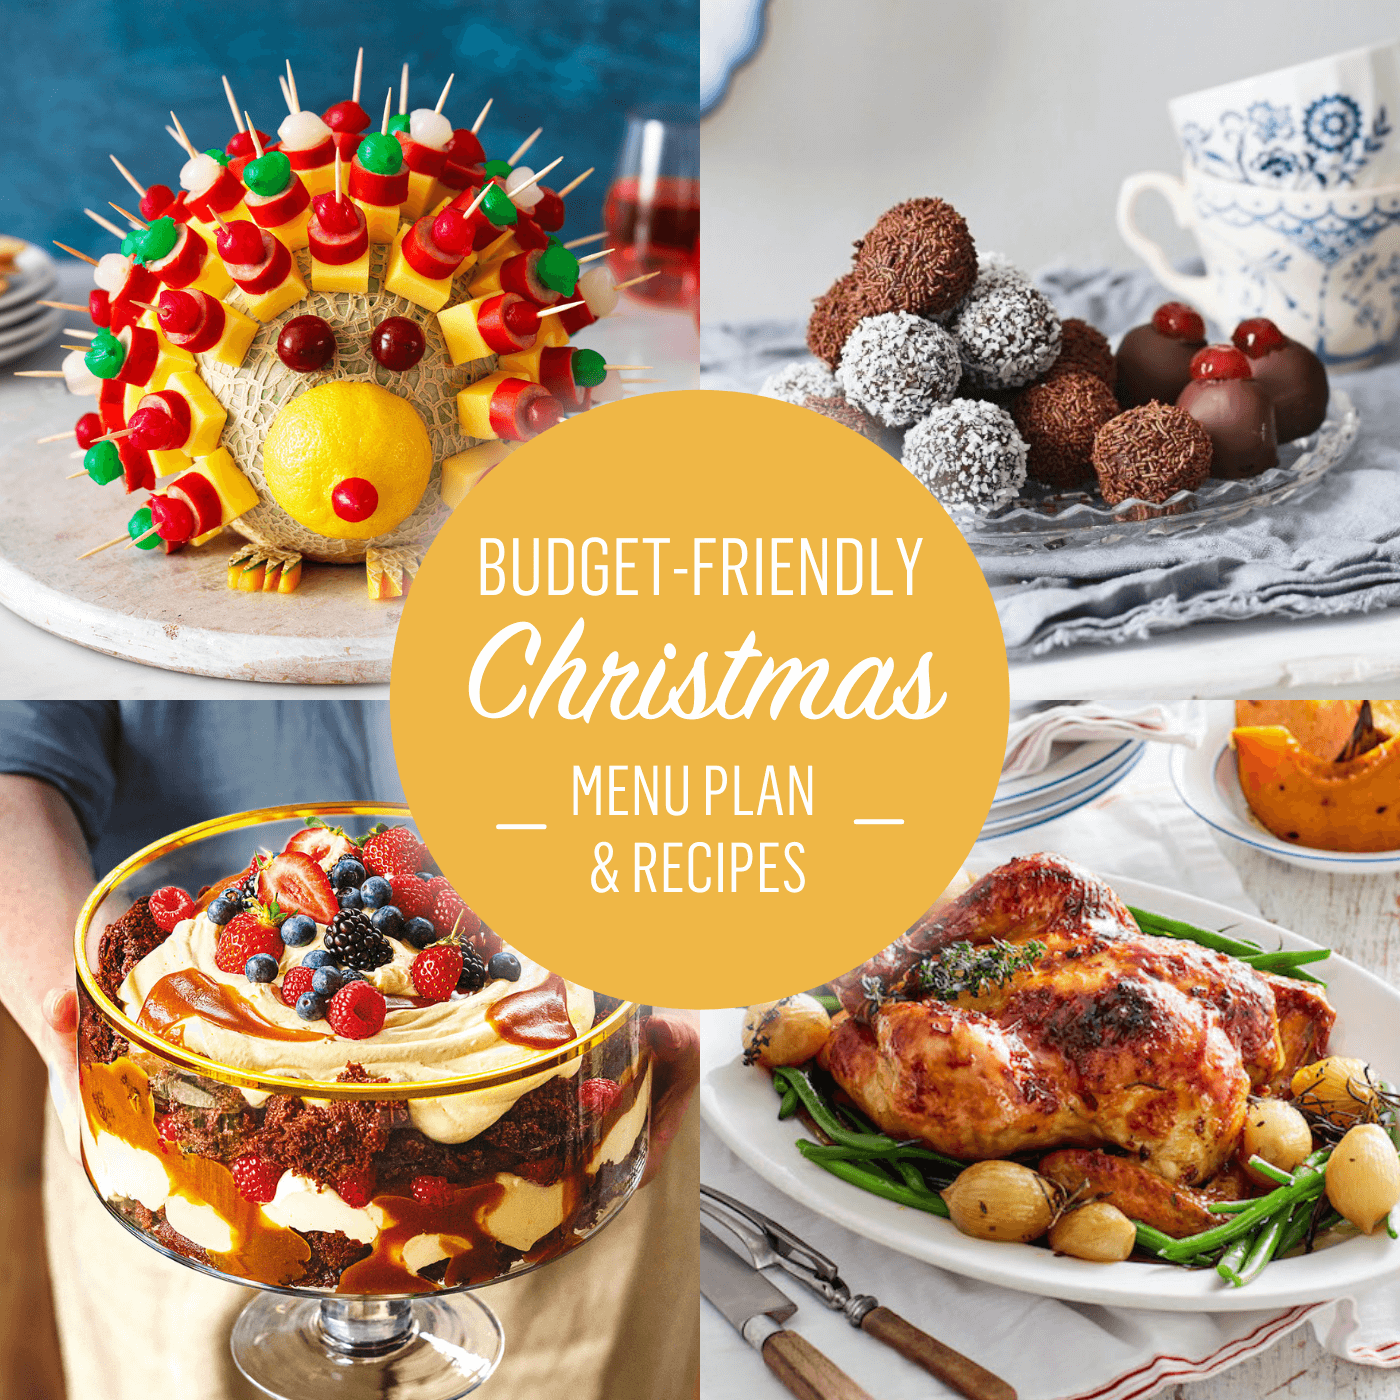 Budget-friendly holiday meal ideas